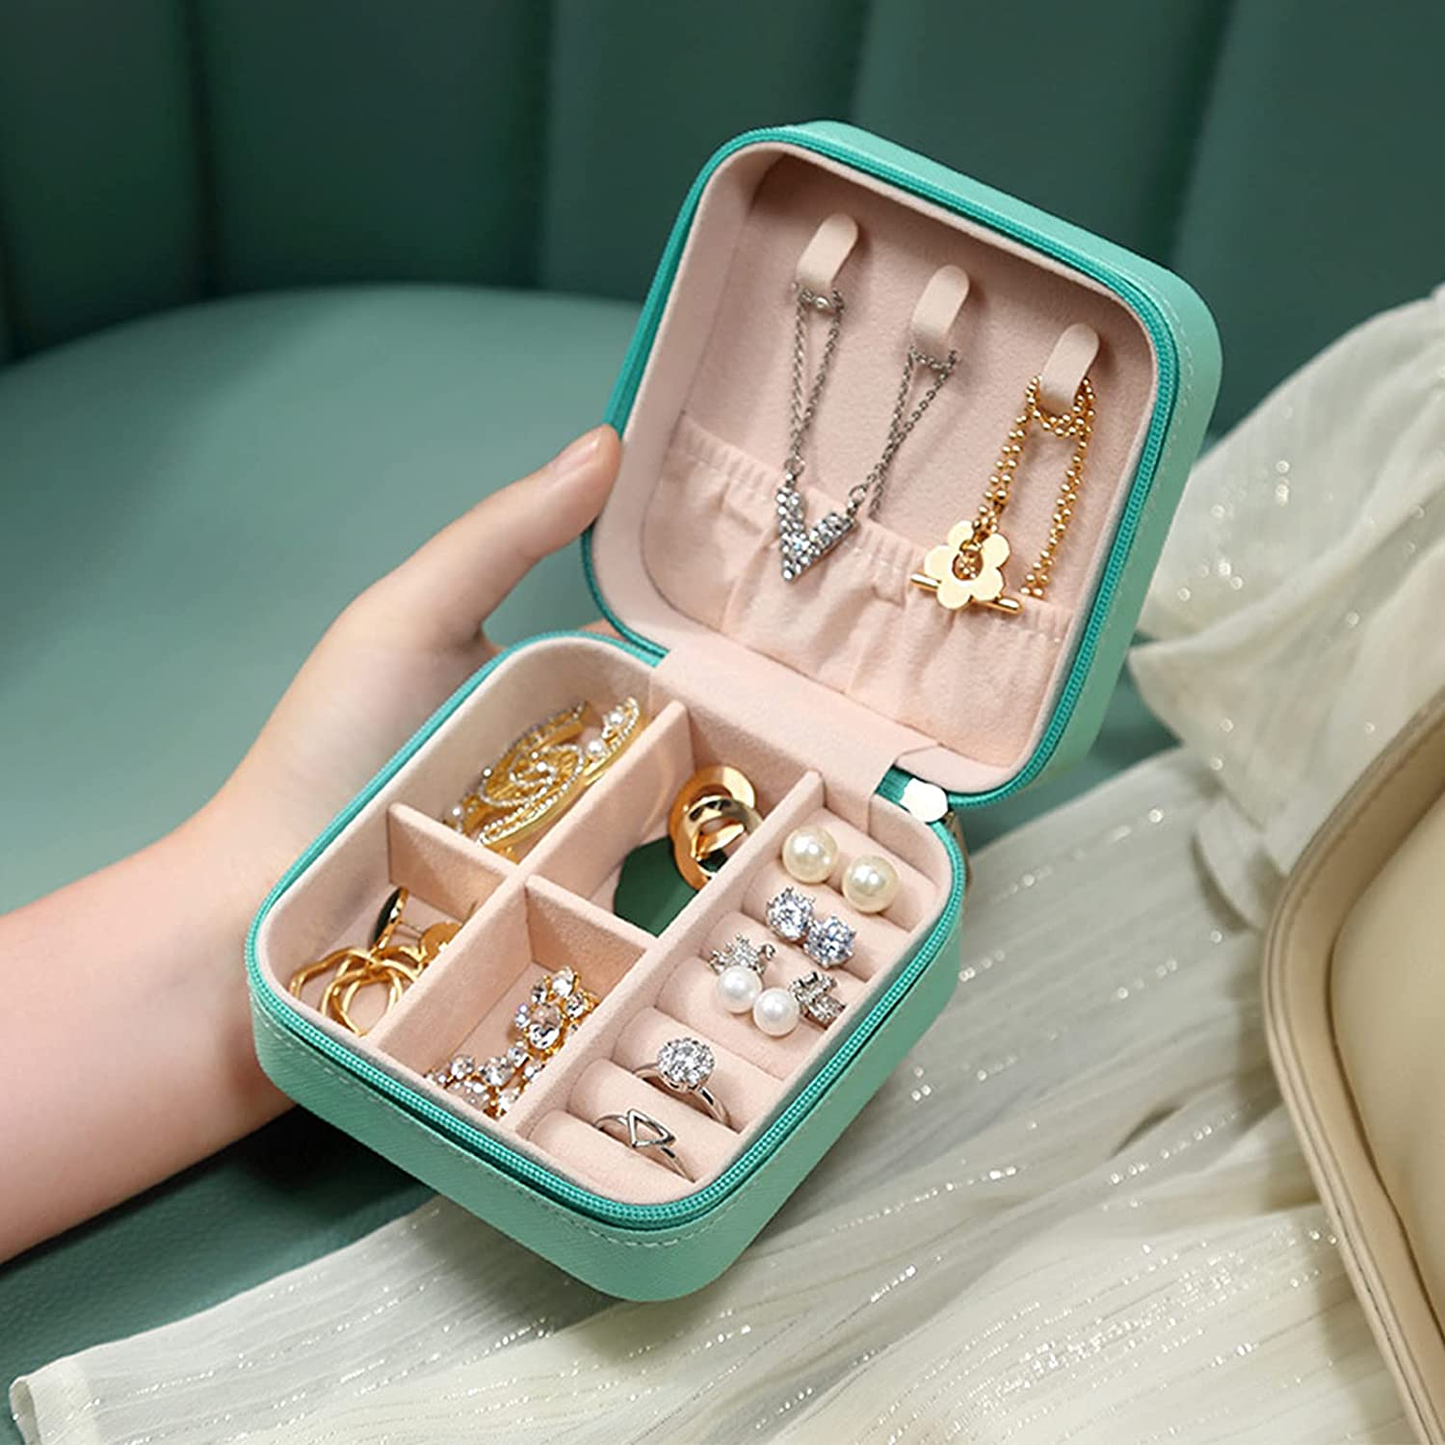 Small Portable Travel Jewelry Box Organizer Display Storage Bag Portable Travel Storage Box for Storage Rings Earrings Necklace (Light Blue)